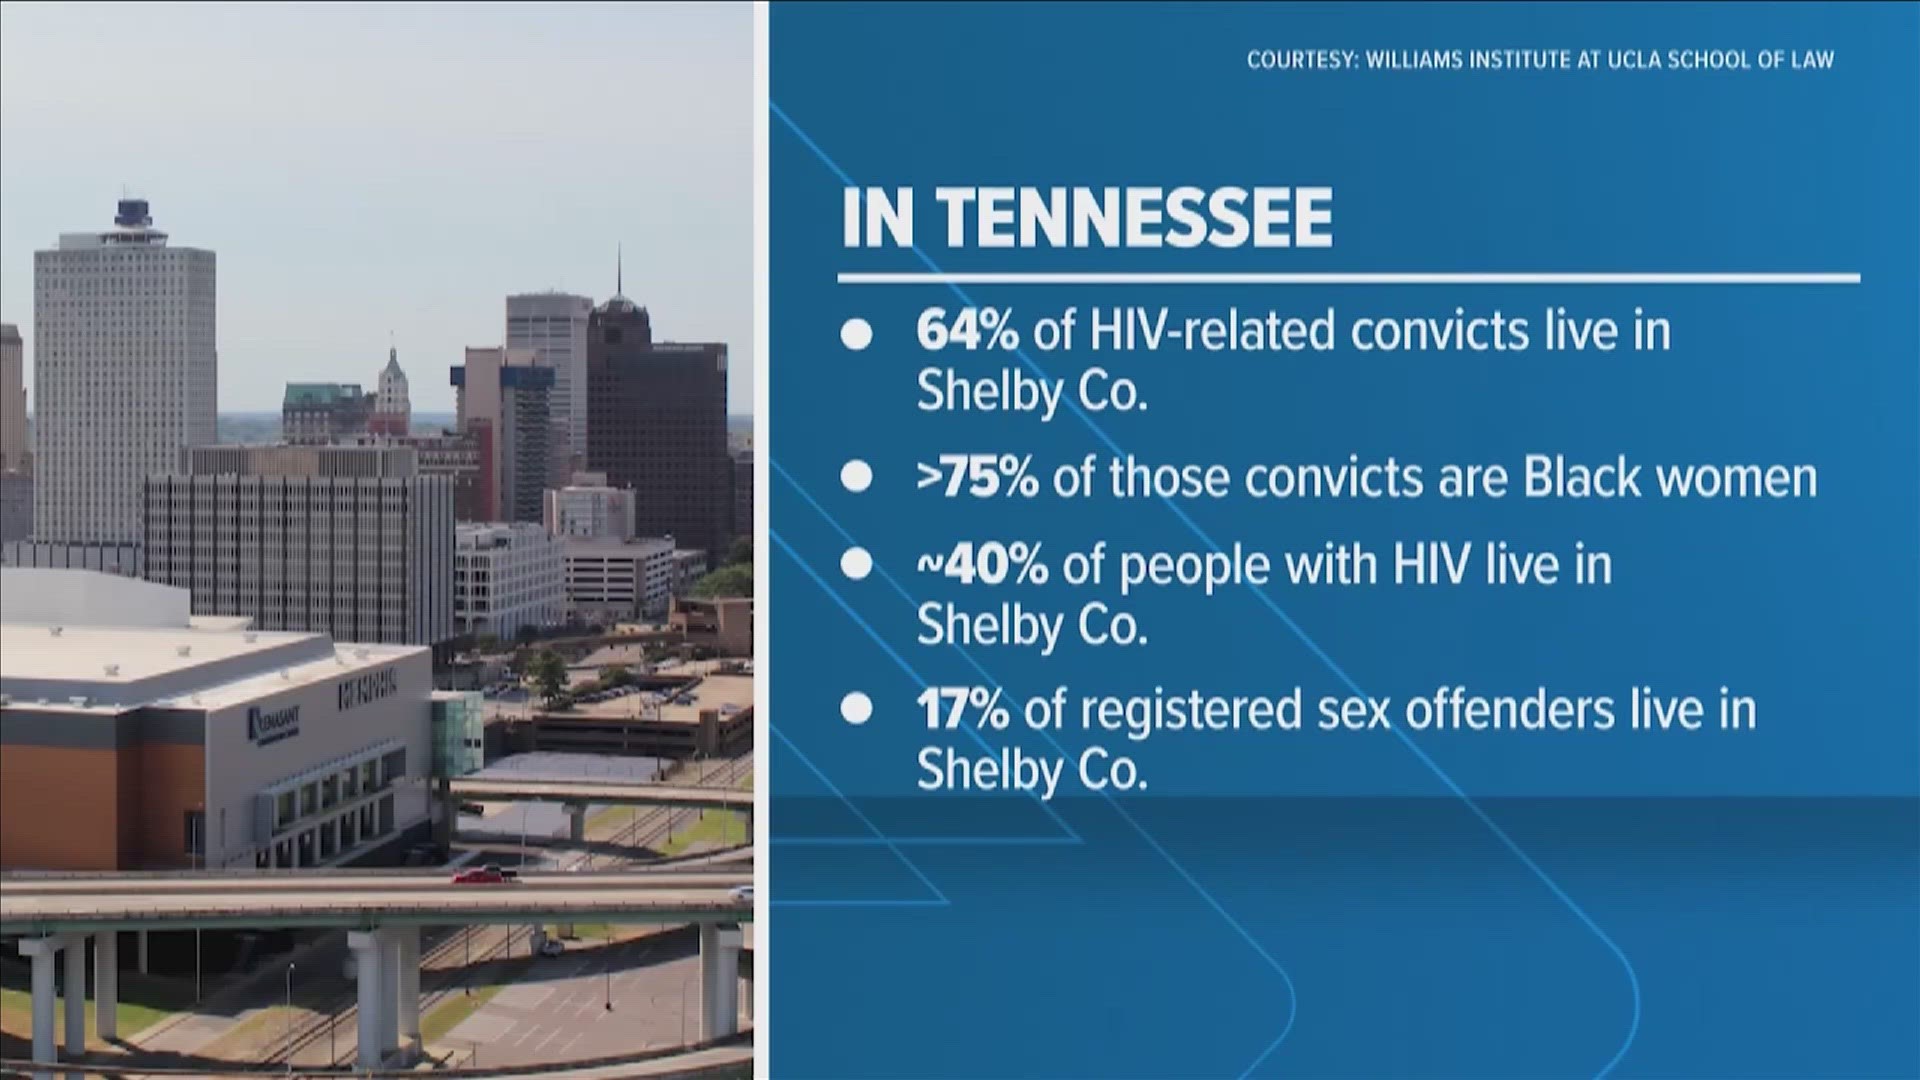 Governor Bill Lee signed a bill that amends HIV criminalization laws in the state and removes a clause that required a life-time inclusion on the registry.